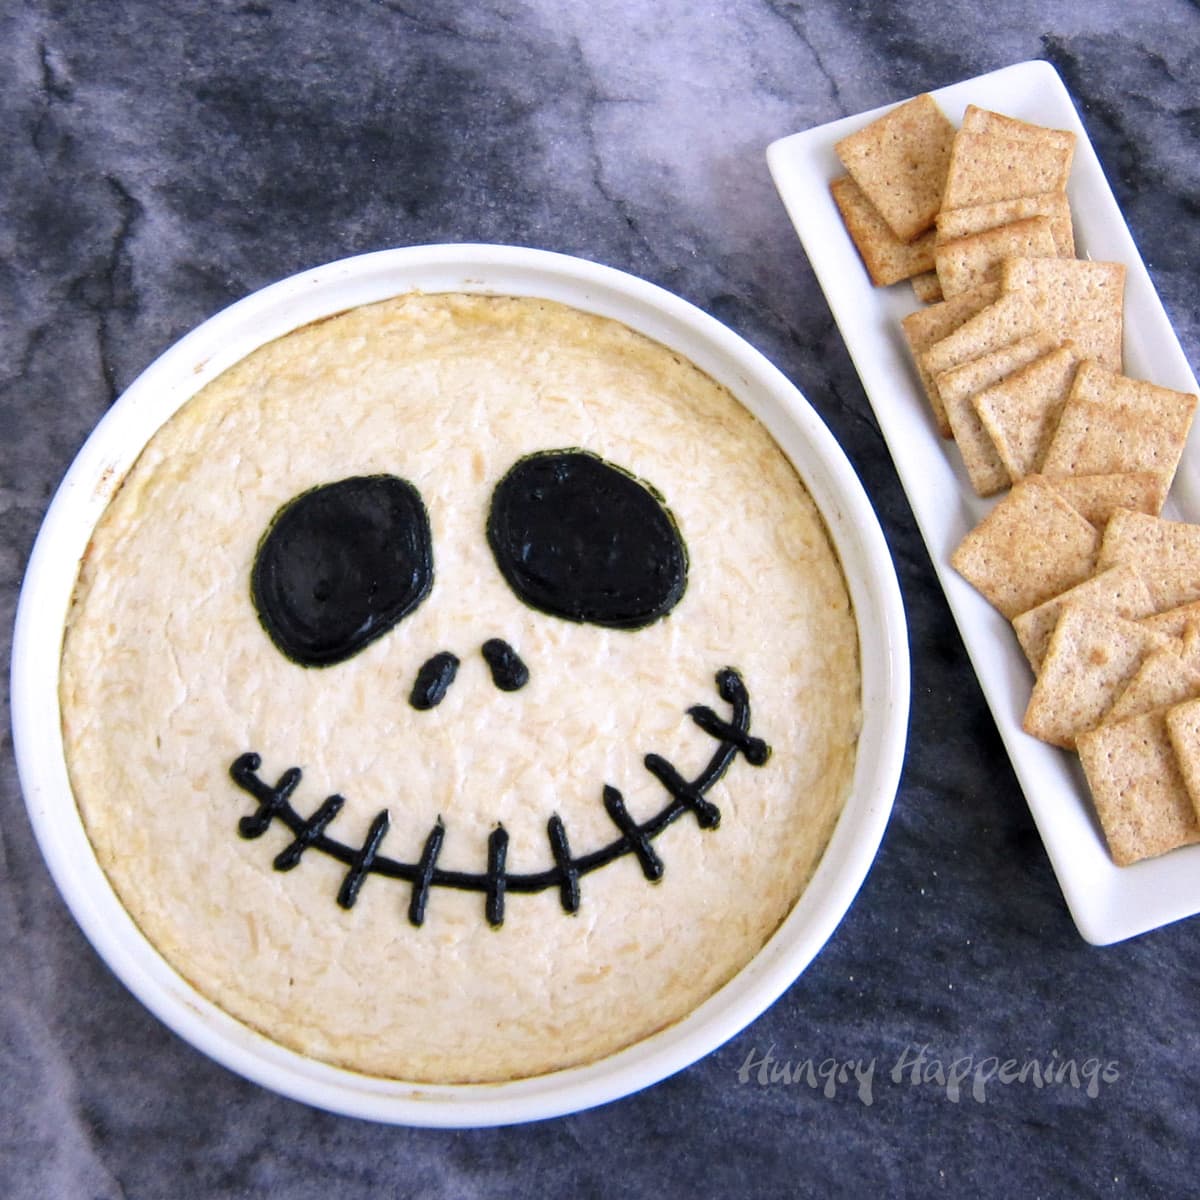 Jack Skellington Dip - a chicken dip decorated with black-colored cream cheese to look like this Nightmare Before Christmas character is served next to crackers.